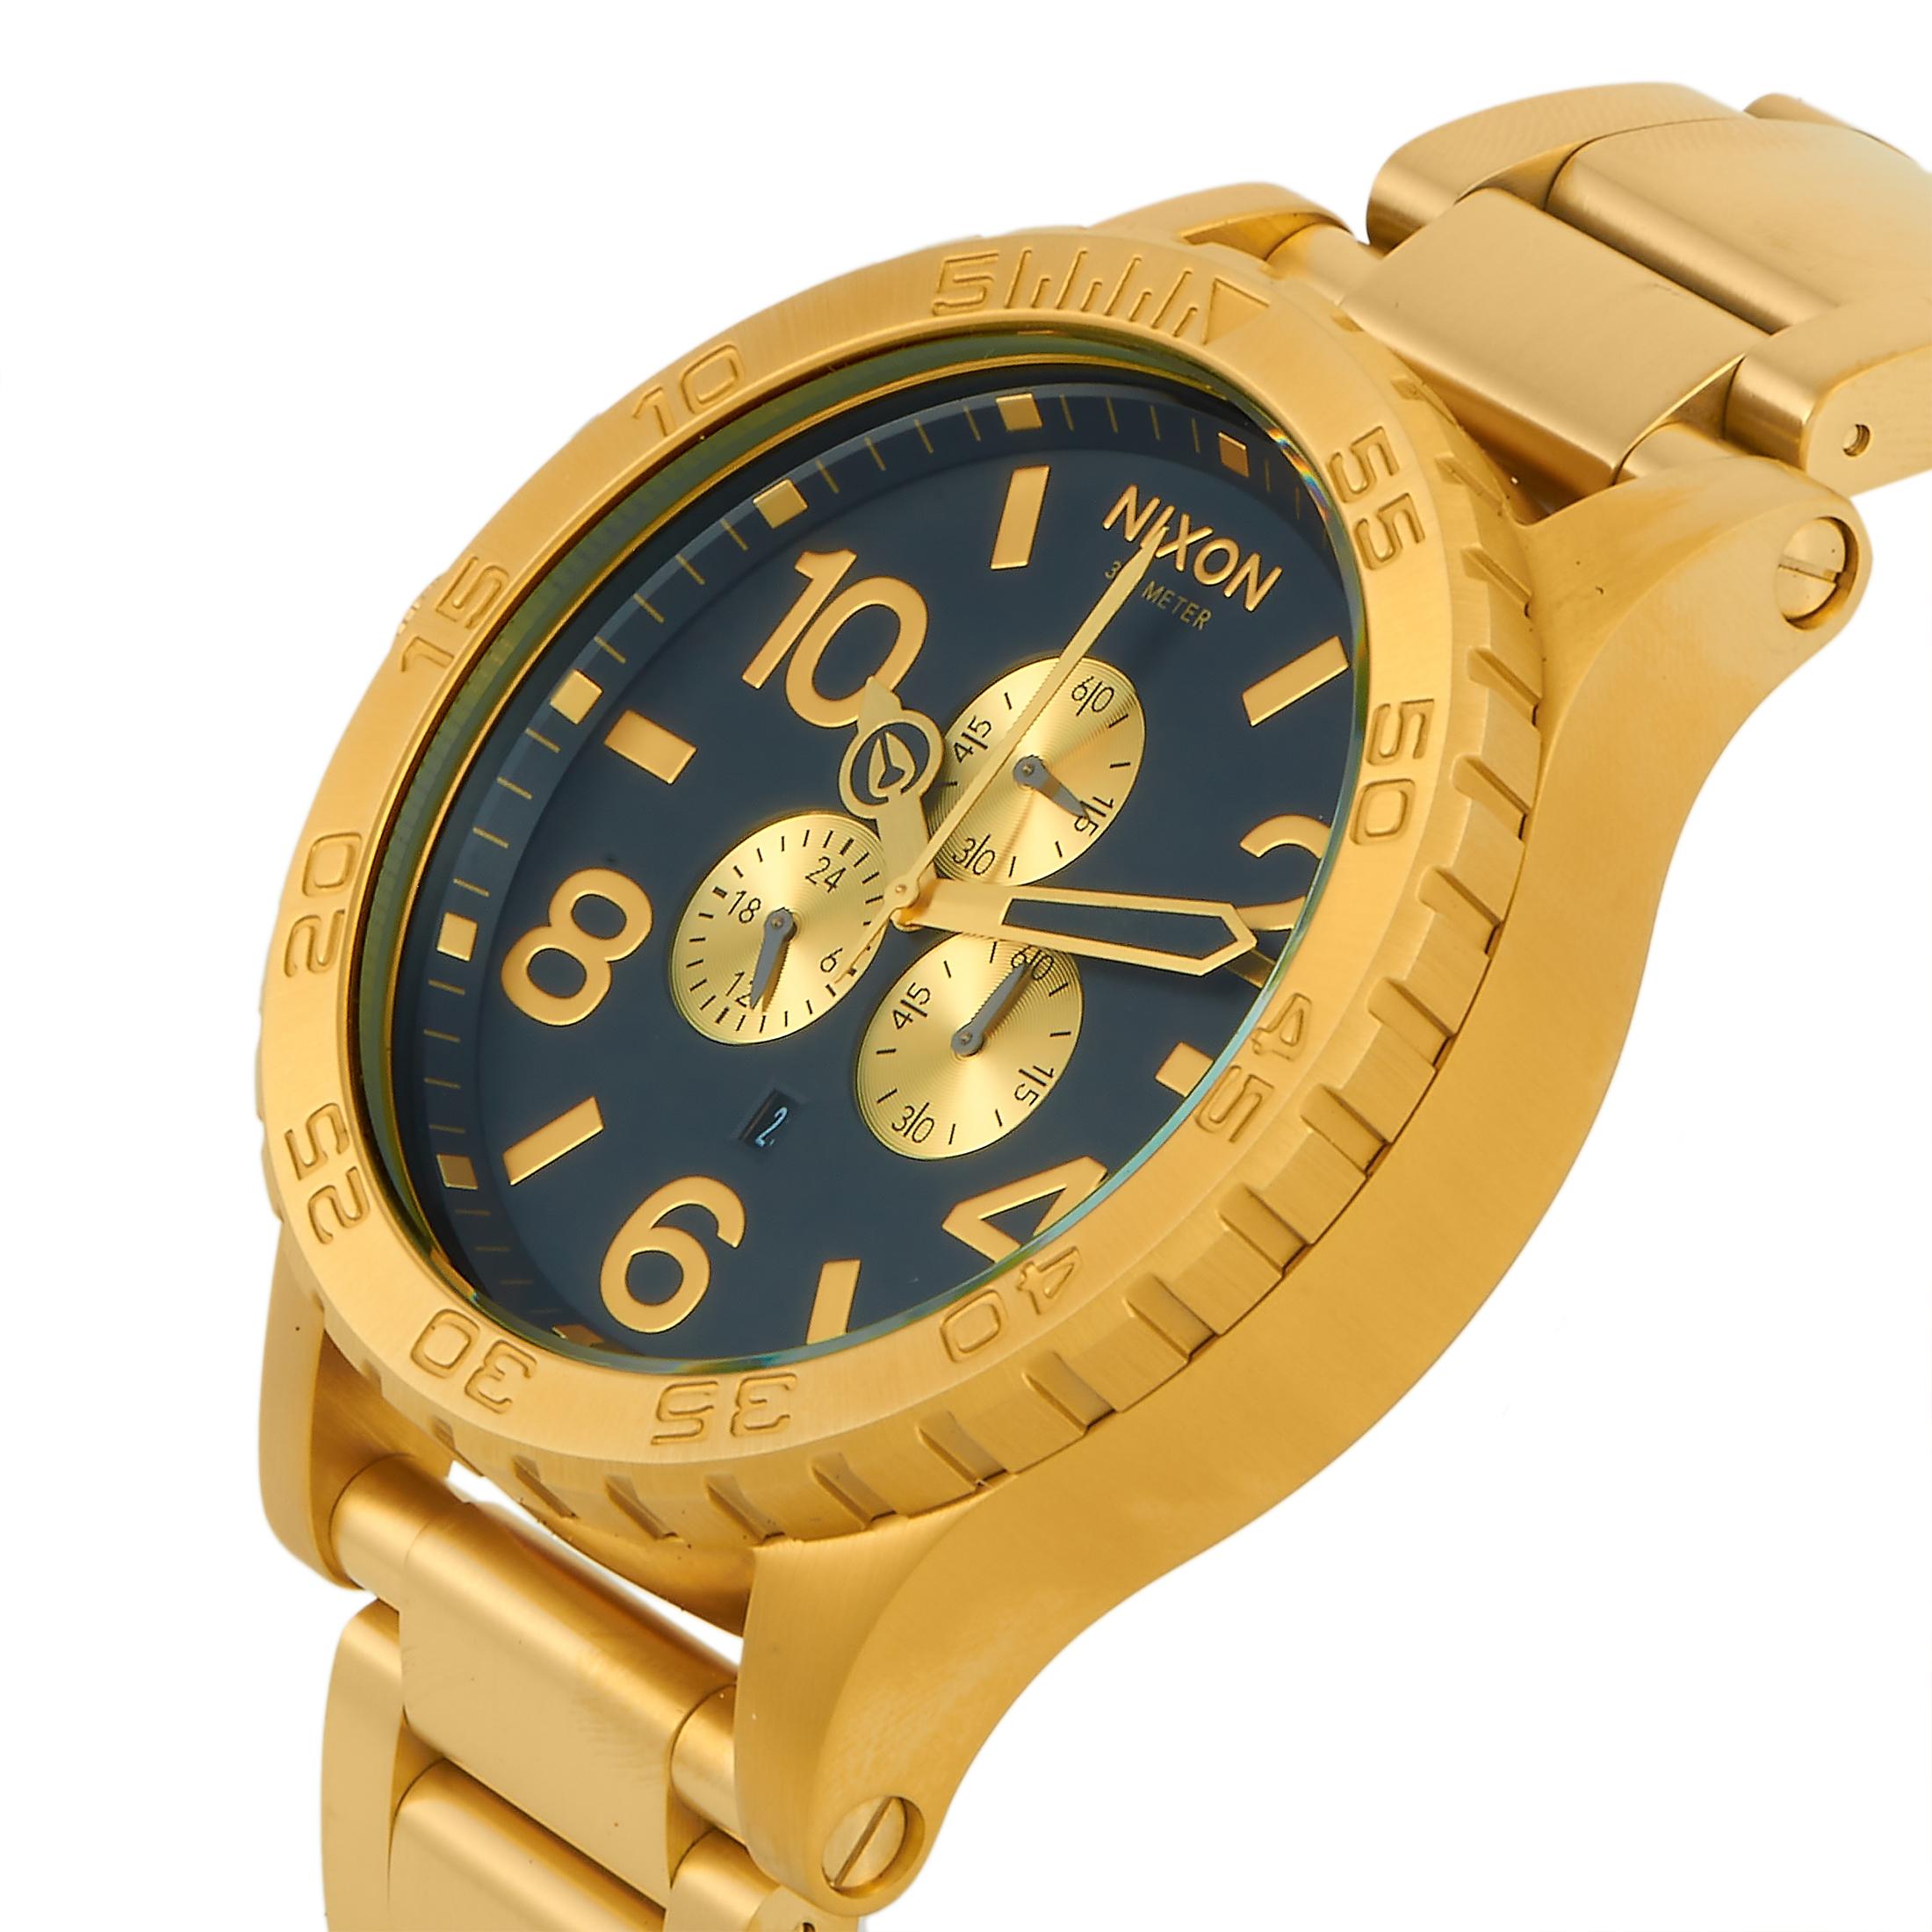 The Nixon 51-30 Chrono All Gold/Black watch, reference number A083-510-00, comes with a 51 mm gold-tone stainless steel case that is fitted with a unidirectional rotating bezel. The case is presented on a matching gold-tone stainless steel bracelet.